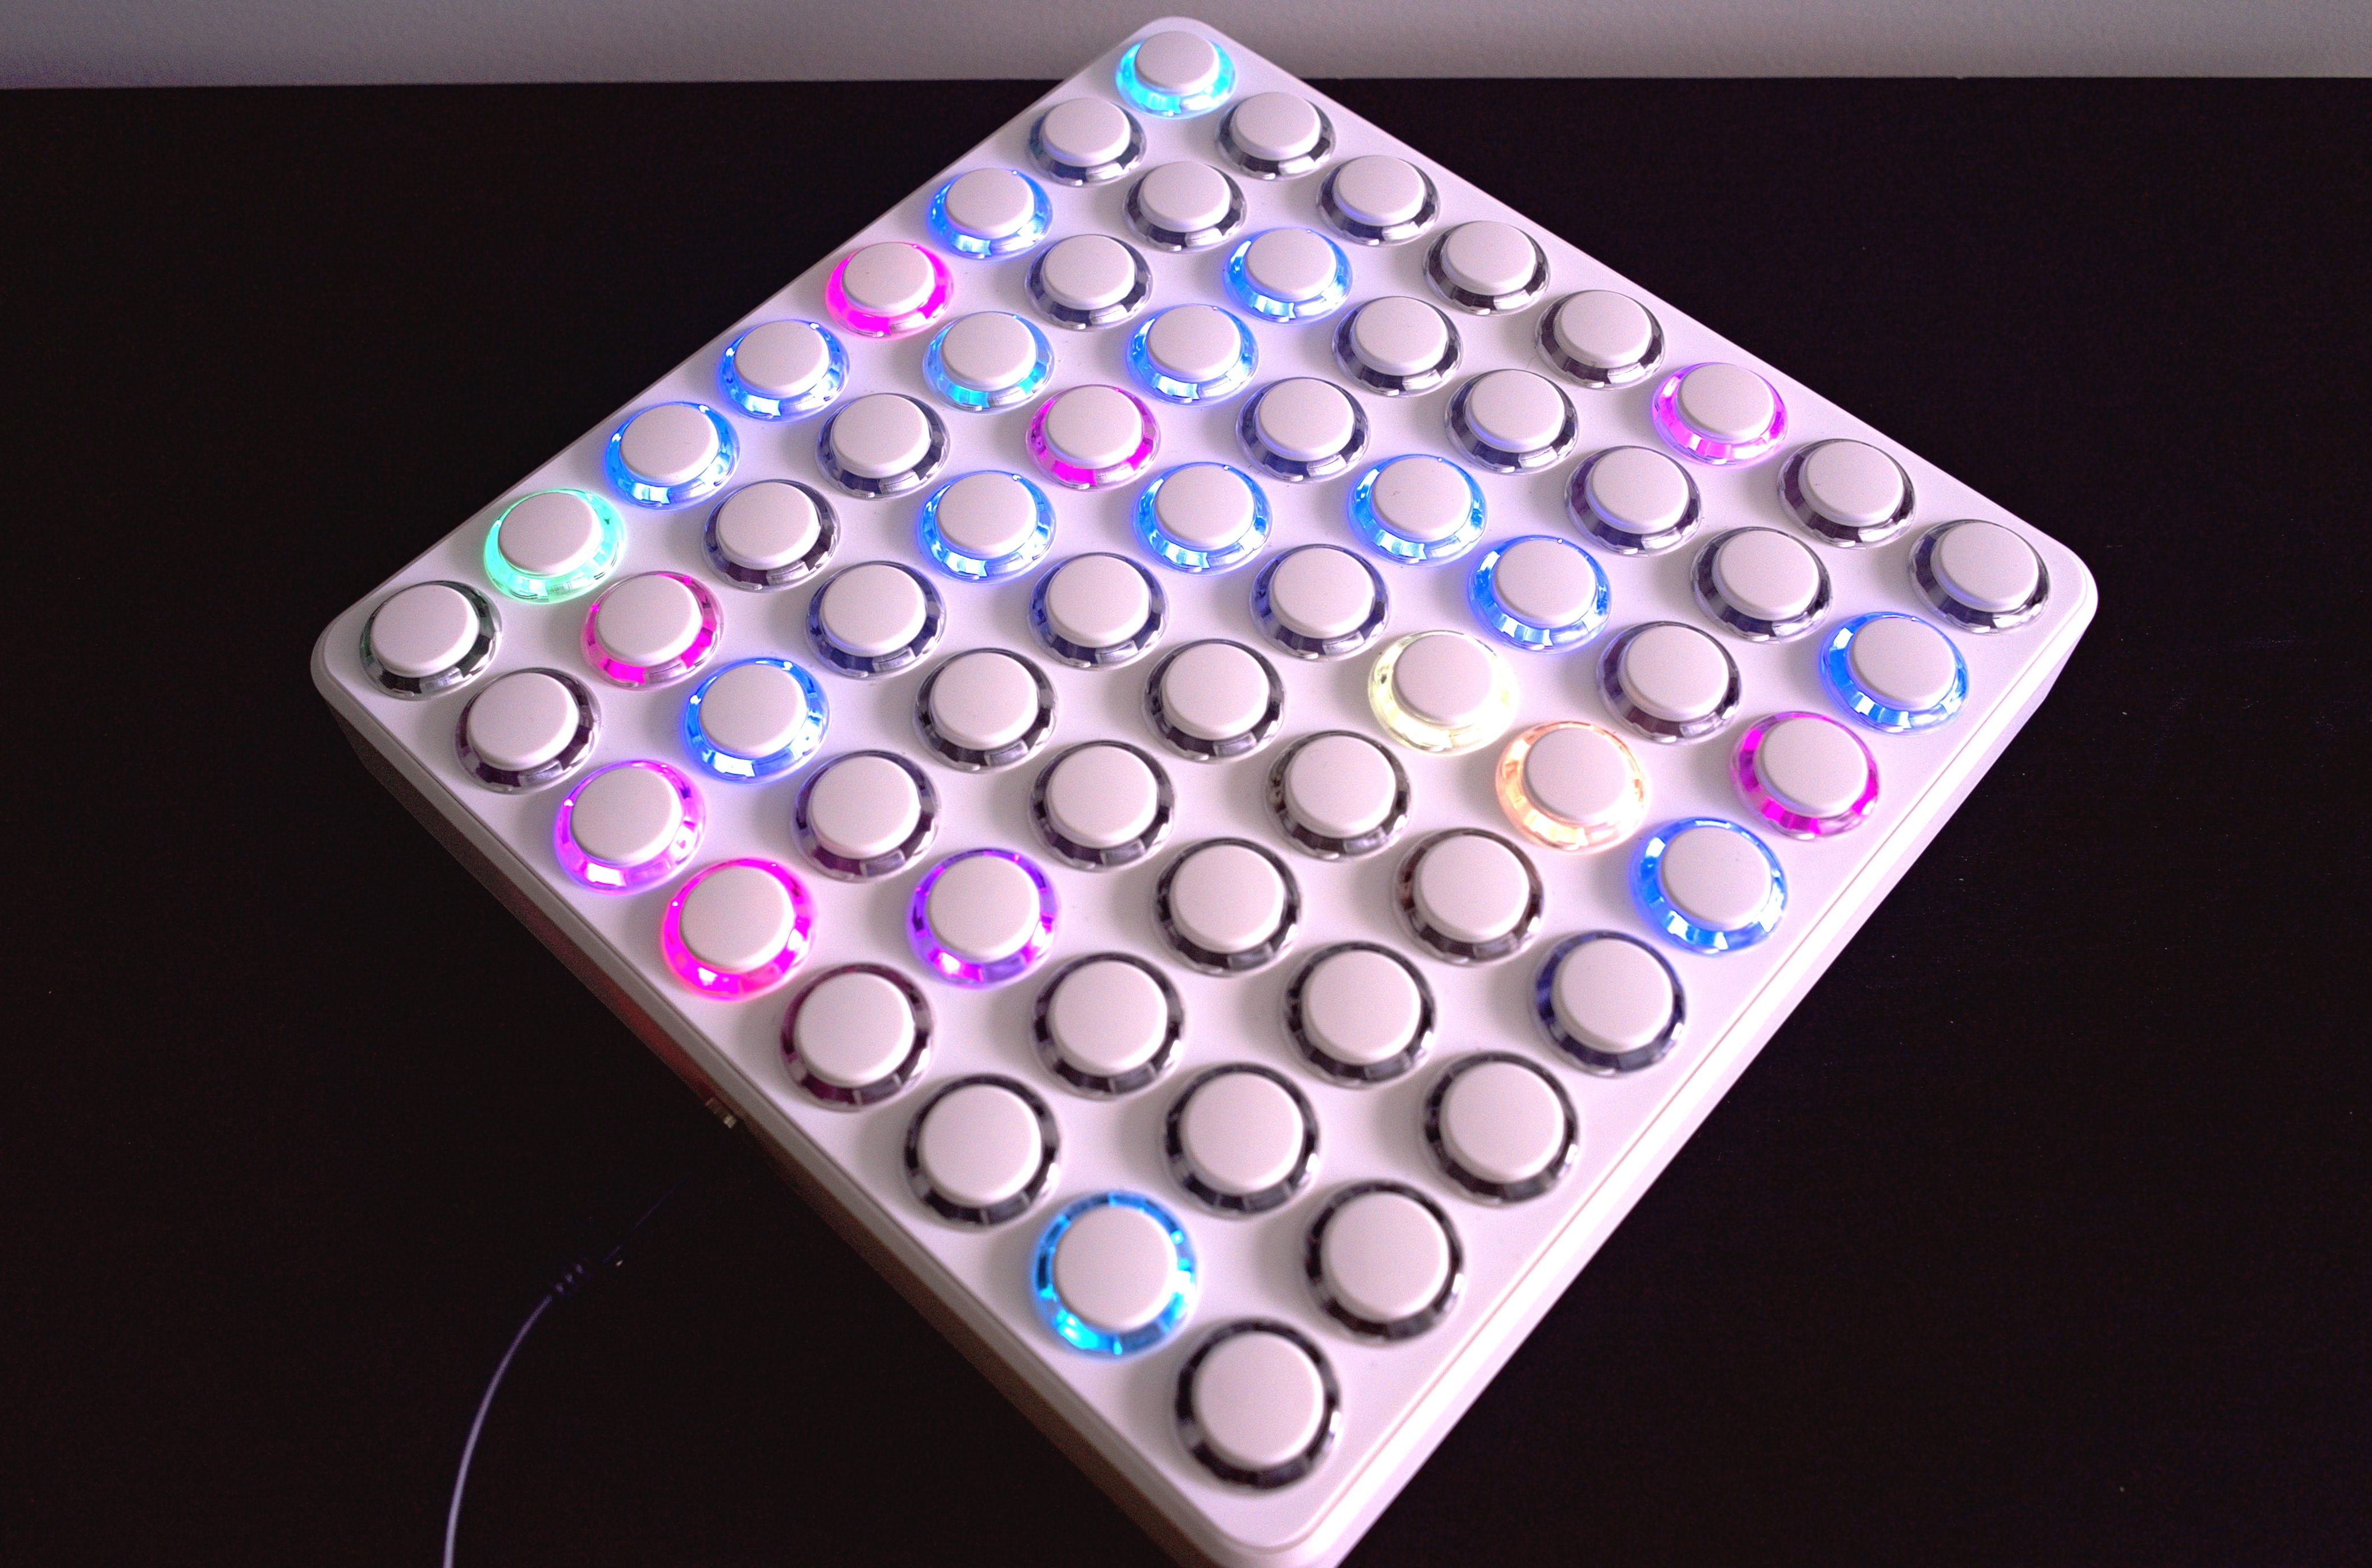 Review Midi Fighter 64 Ask Audio